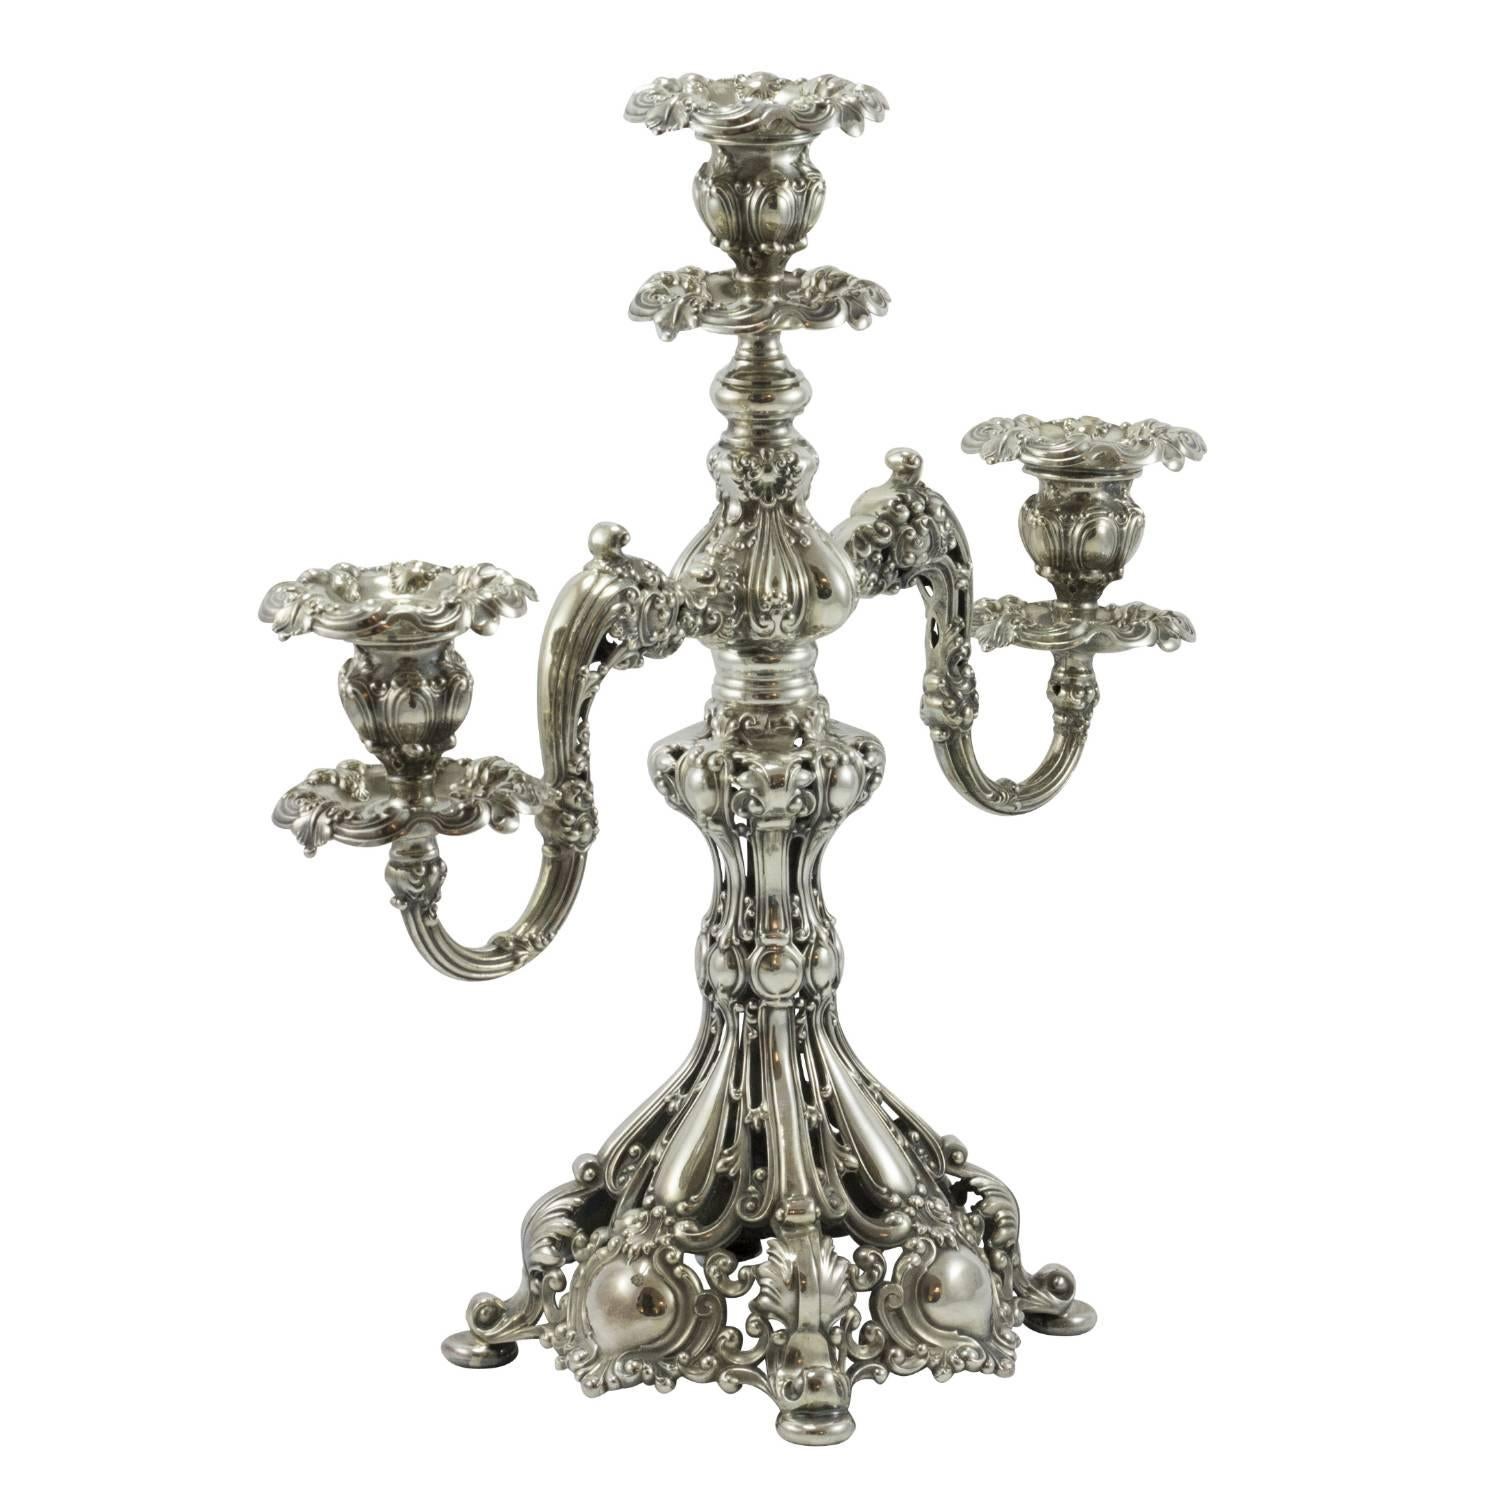 Late Victorian Late 19th Century Silver Plate 'Renaissance' Candelabras by Reed and Barton For Sale